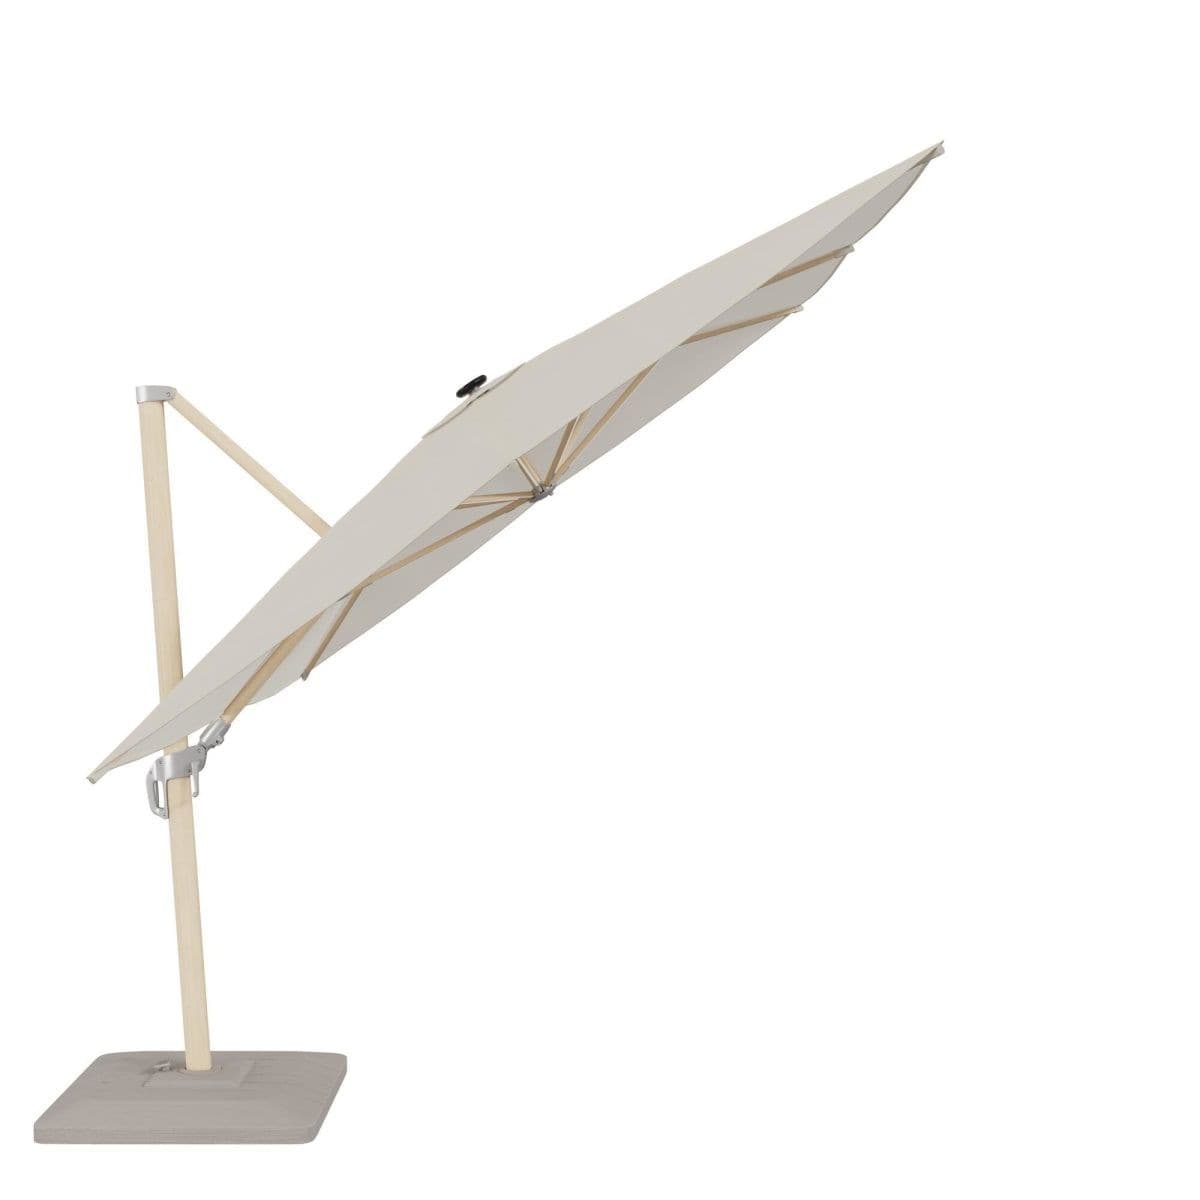 SONORA NATERIAL Umbrella with arm aluminum 280X390 white with led lighting - best price from Maltashopper.com BR500013620